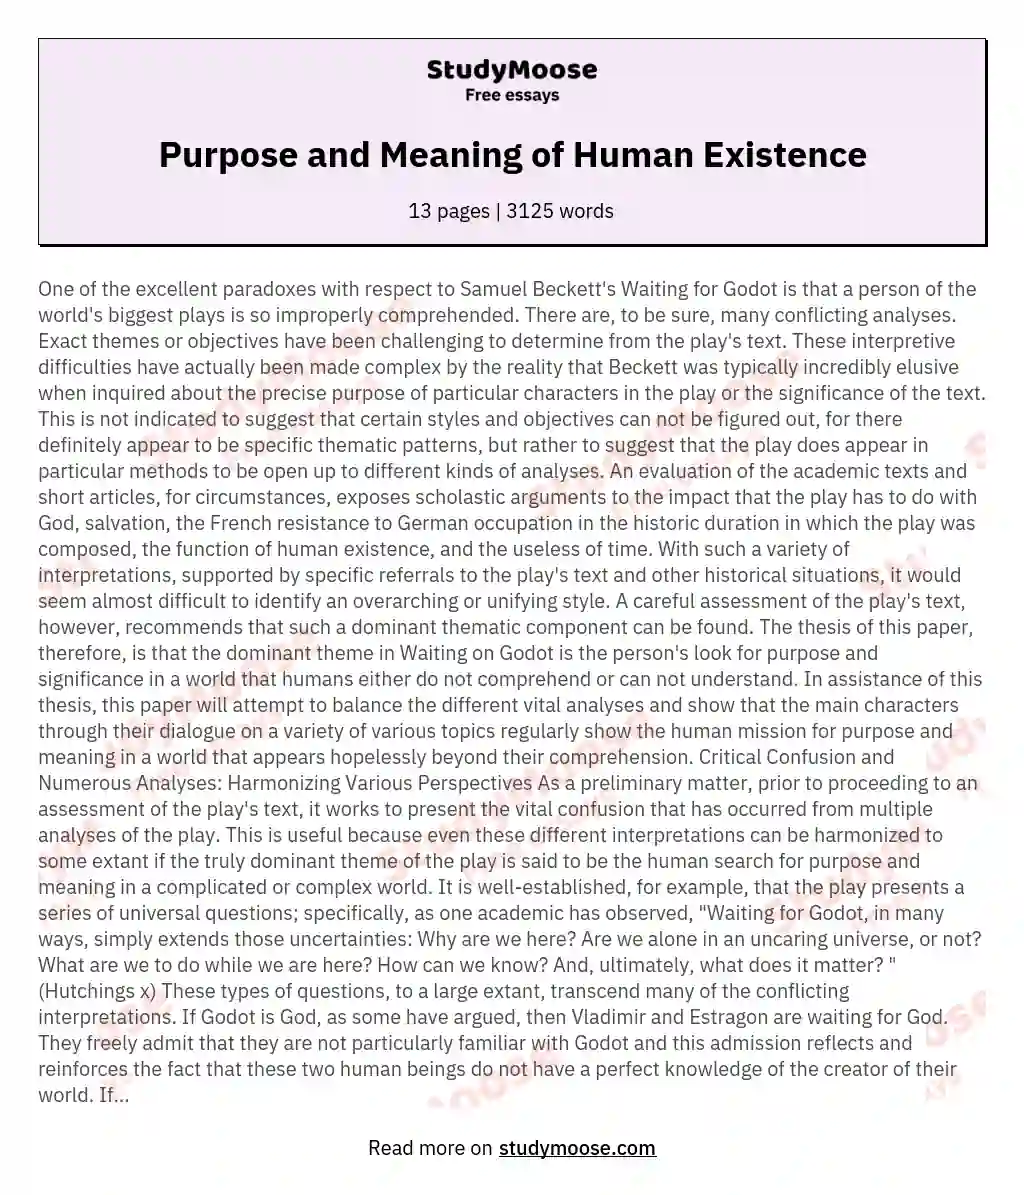 Purpose and Meaning of Human Existence essay